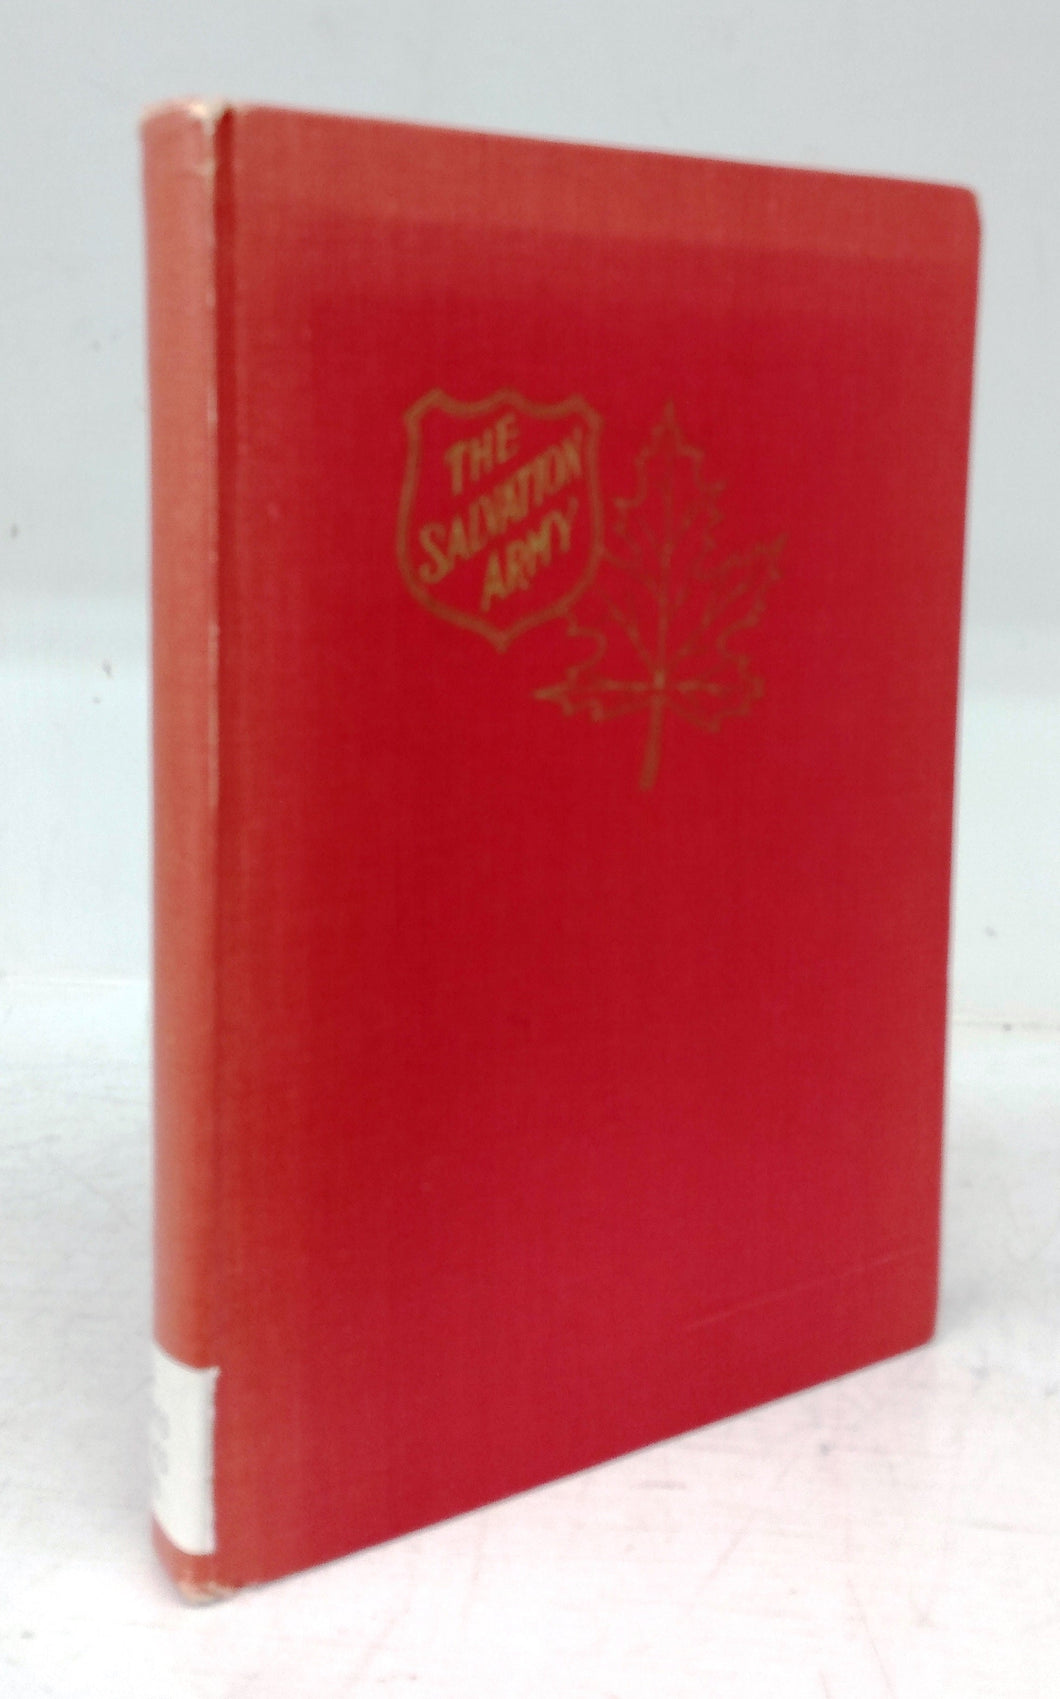 Red Shield in Action: A Record of Canadian Salvation Army War Services in the Second Great War.